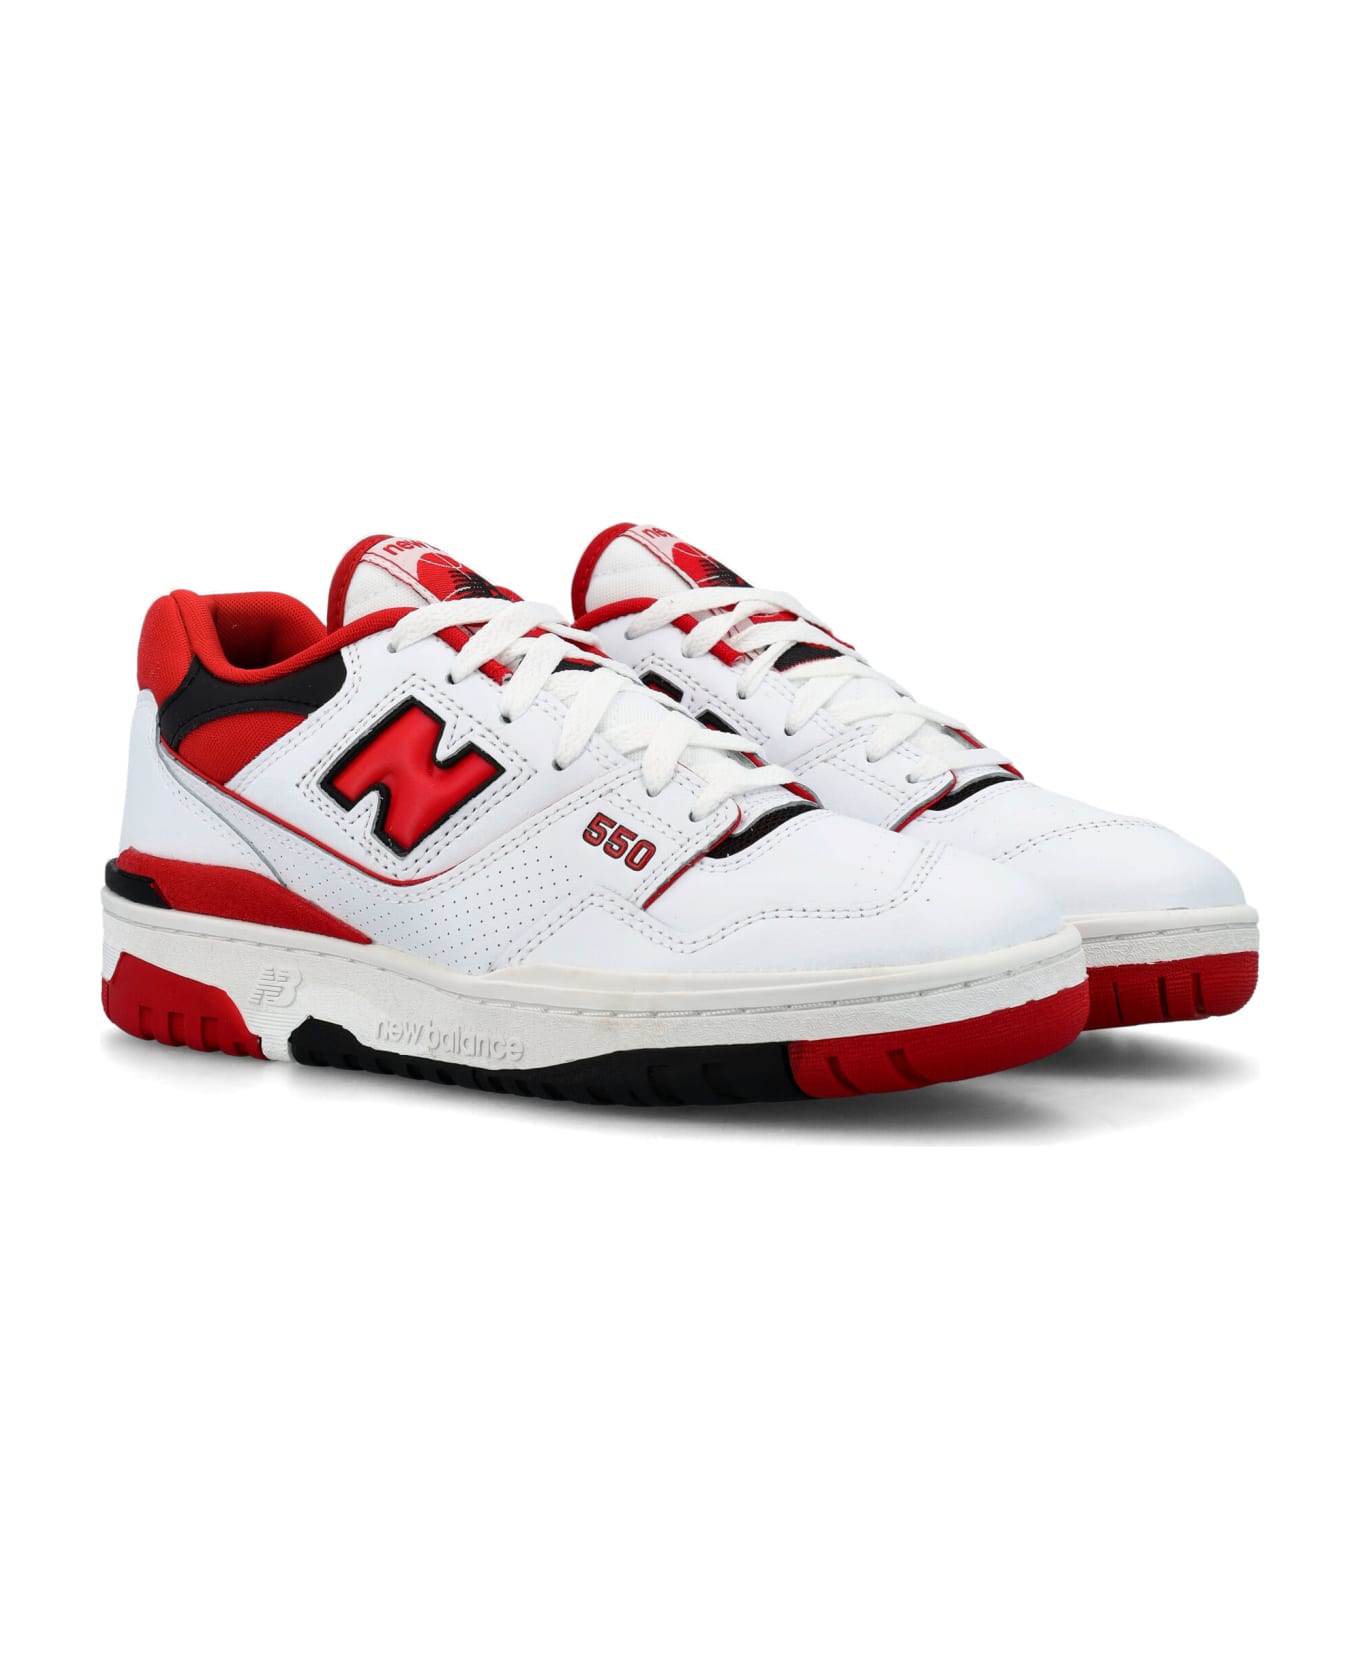 New Balance 550 Low Top Sneakers - WHITE/RED